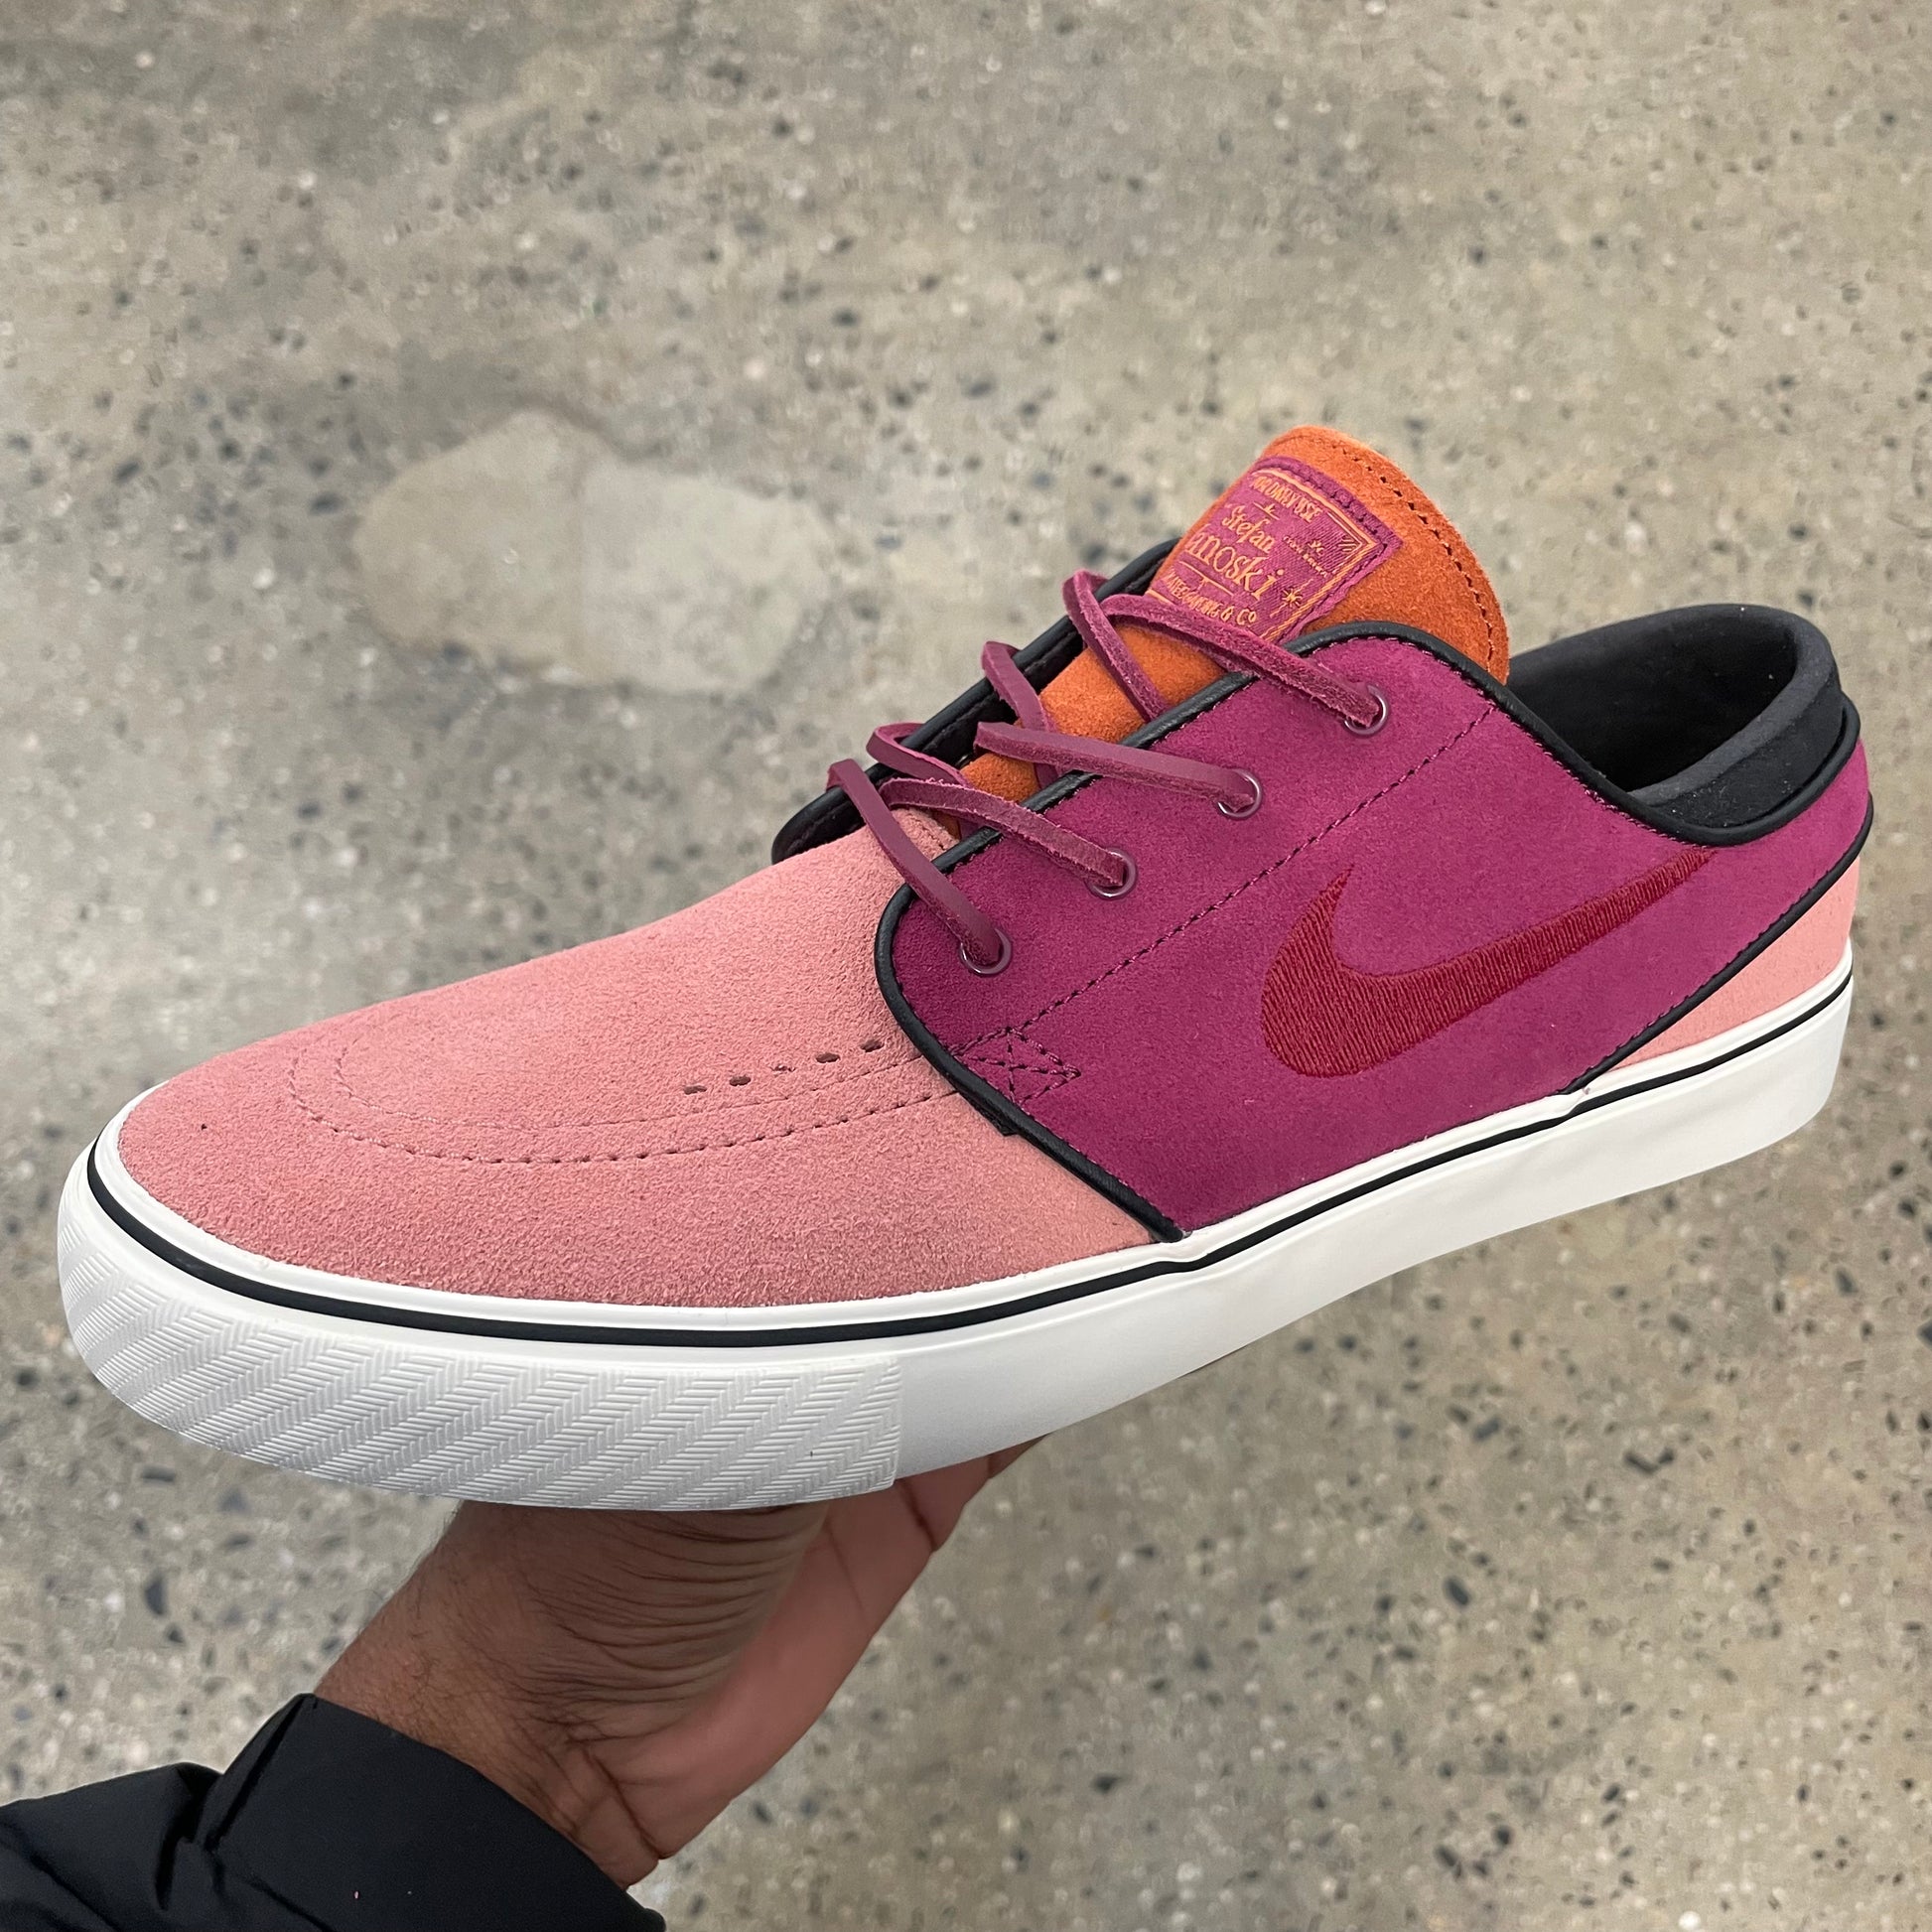 dual tone pink suede low top sneaker with white sole, side view